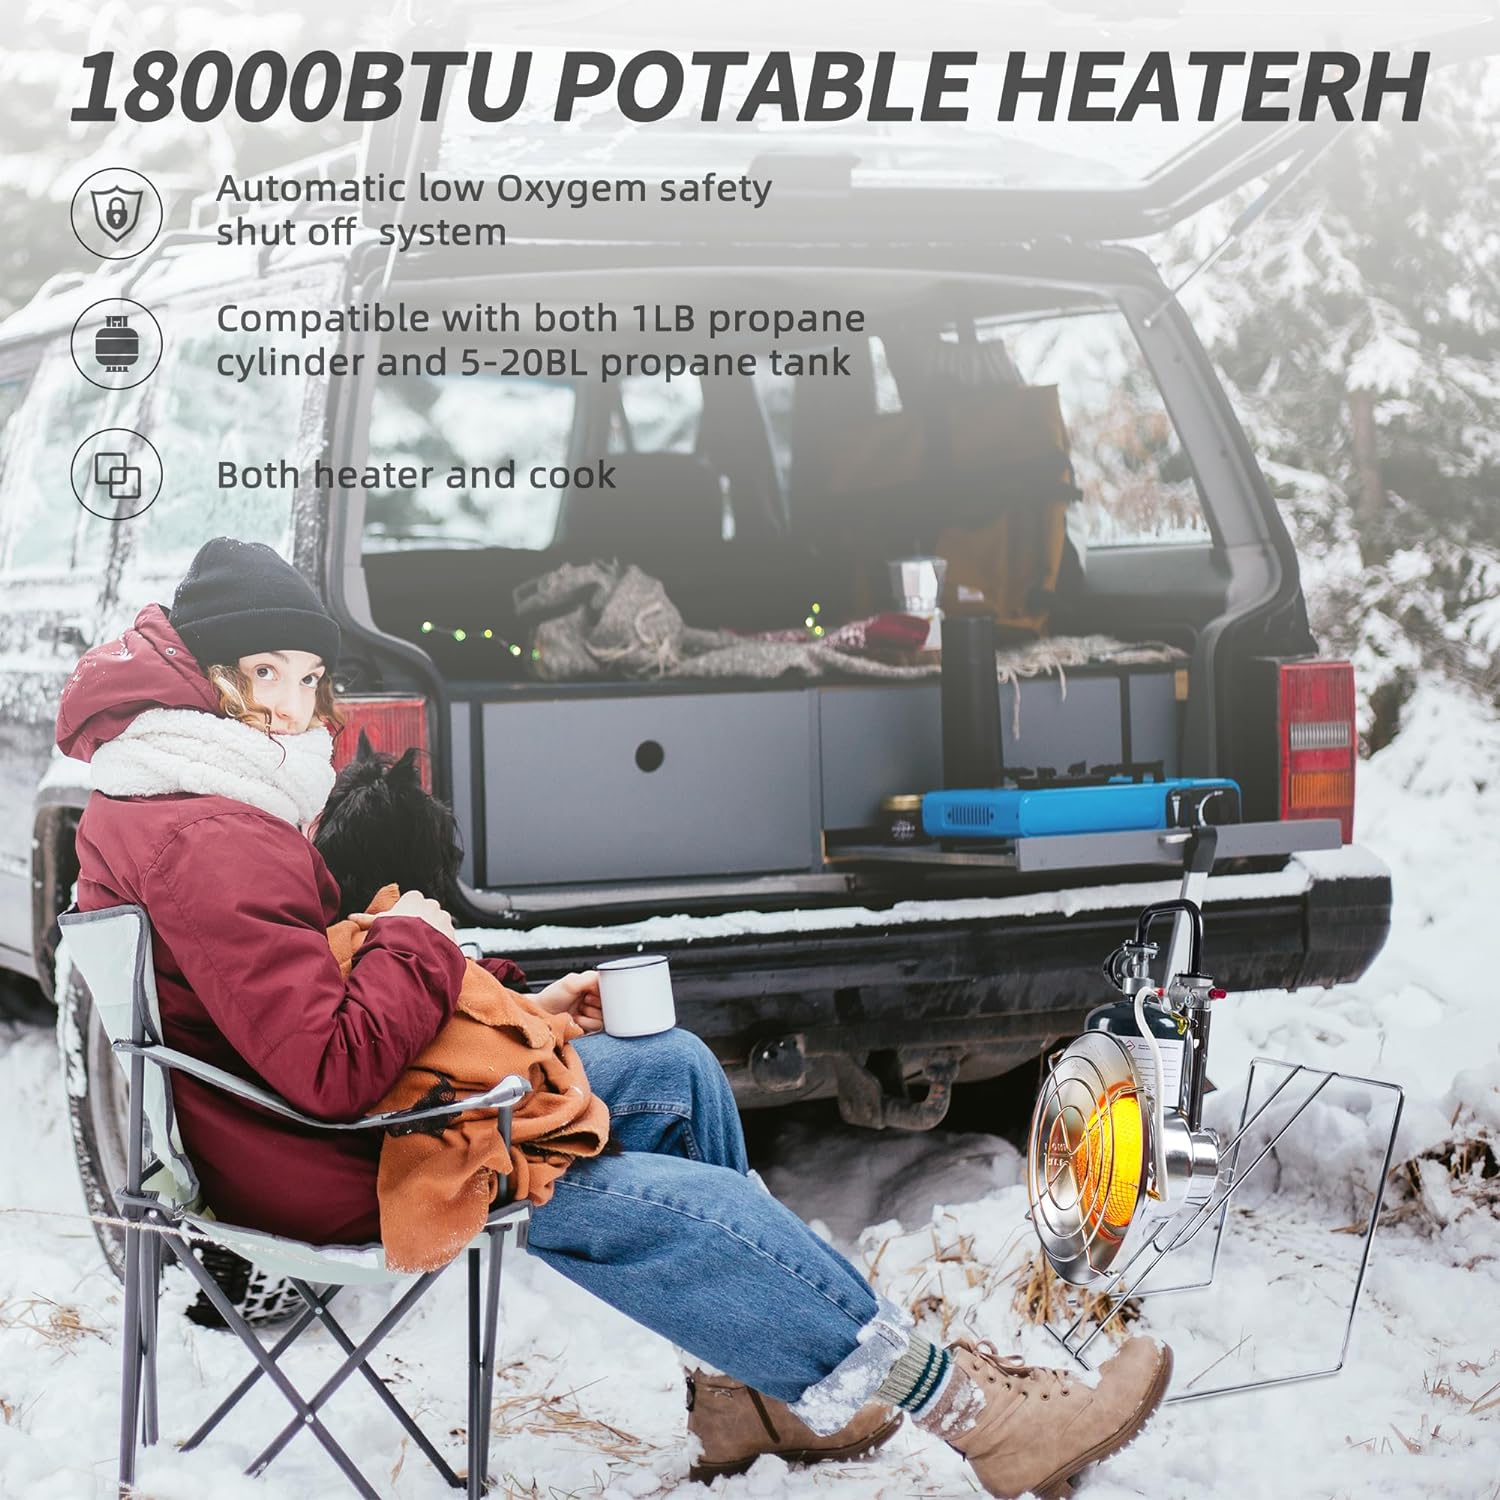 GASPOWOR Propane Heater Review